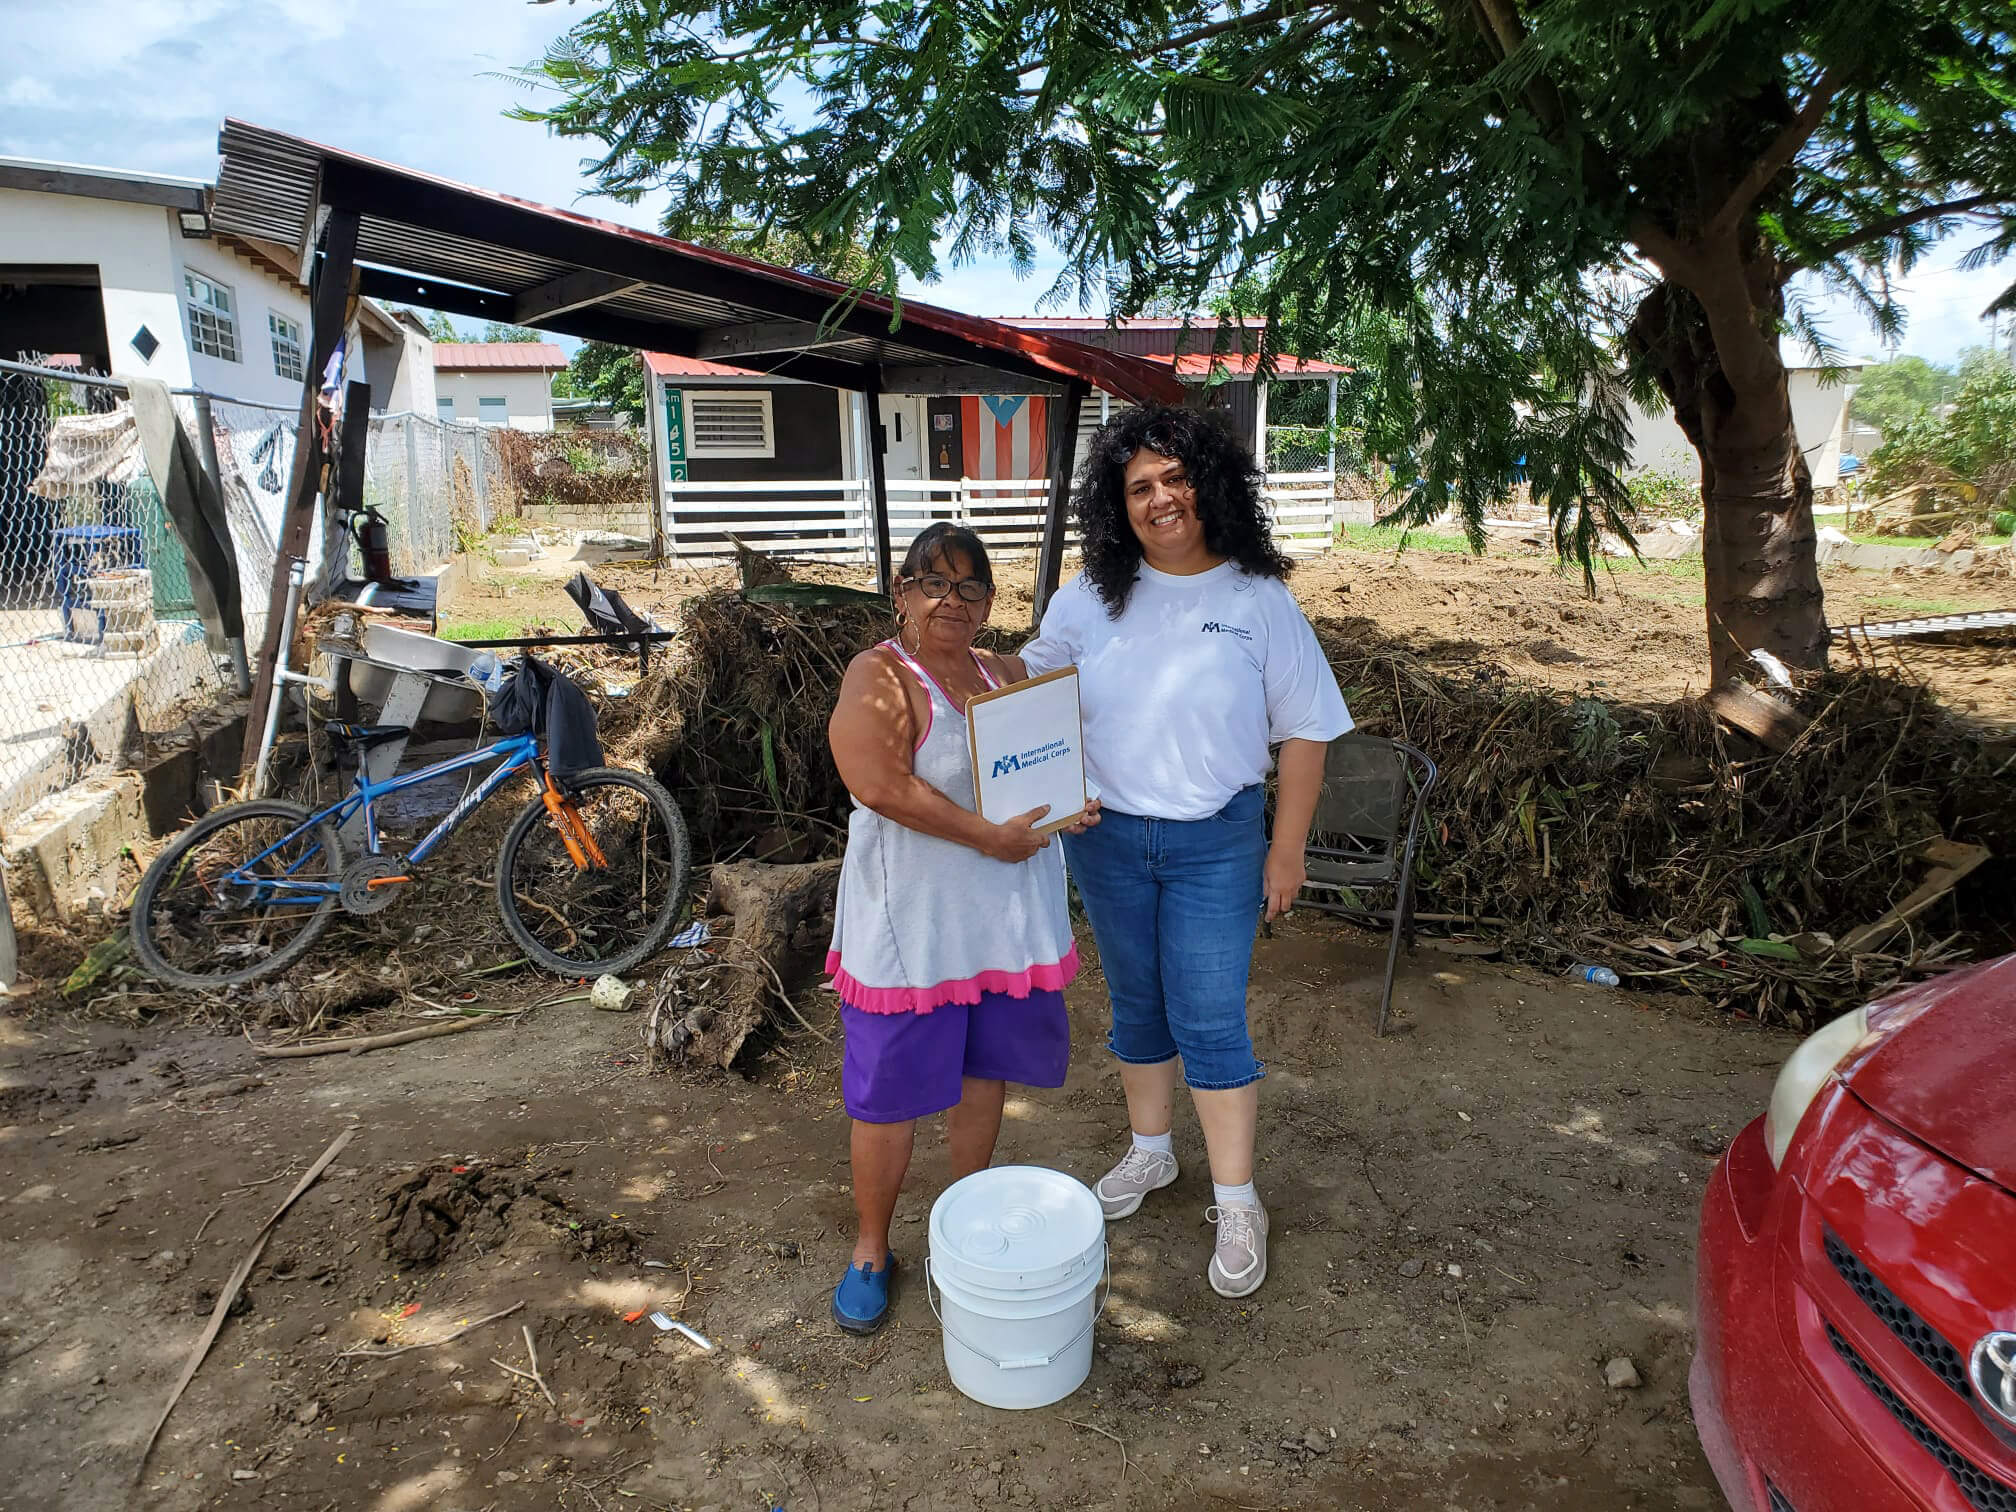 Nelida (right) is one of the people in the Salinas municipality of Puerto Rico whom we provided care to after 2022’s Hurricane Fiona. Though "the water destroyed everything," Nelida told our teams how grateful she was to receive our support, saying, "You arrived at a precious moment. You and others came to help and provide medical care. Medically speaking, this community was destroyed."